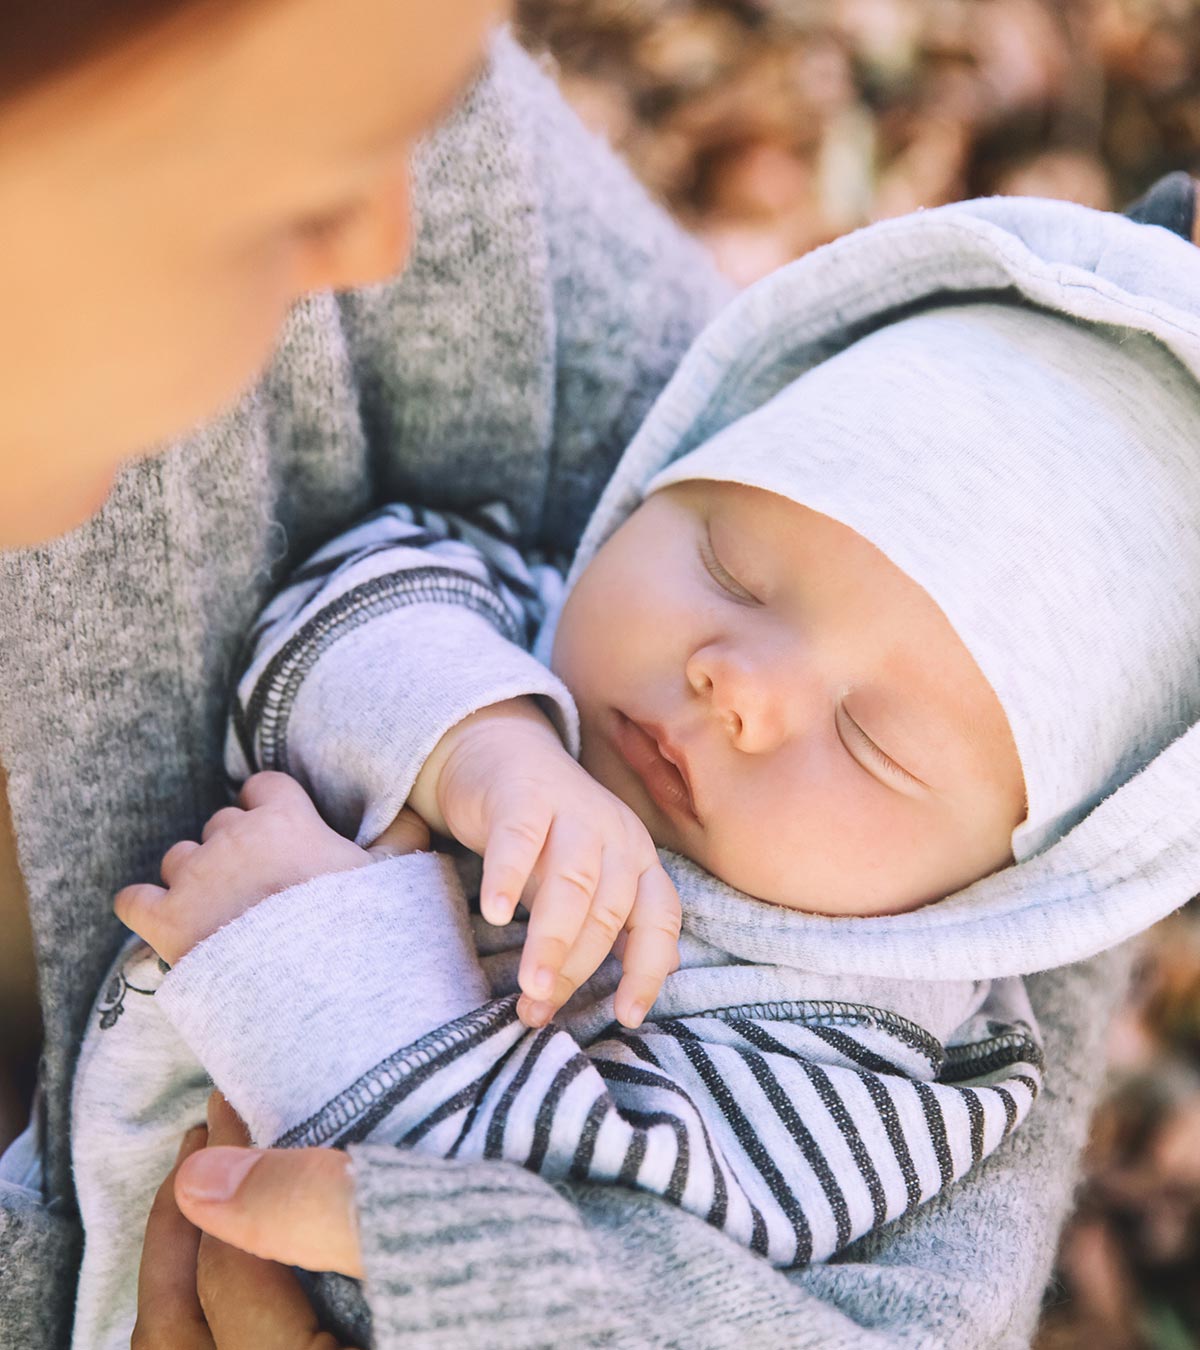 When Can You Take a Newborn Outside? Tips, Benefits & Risks